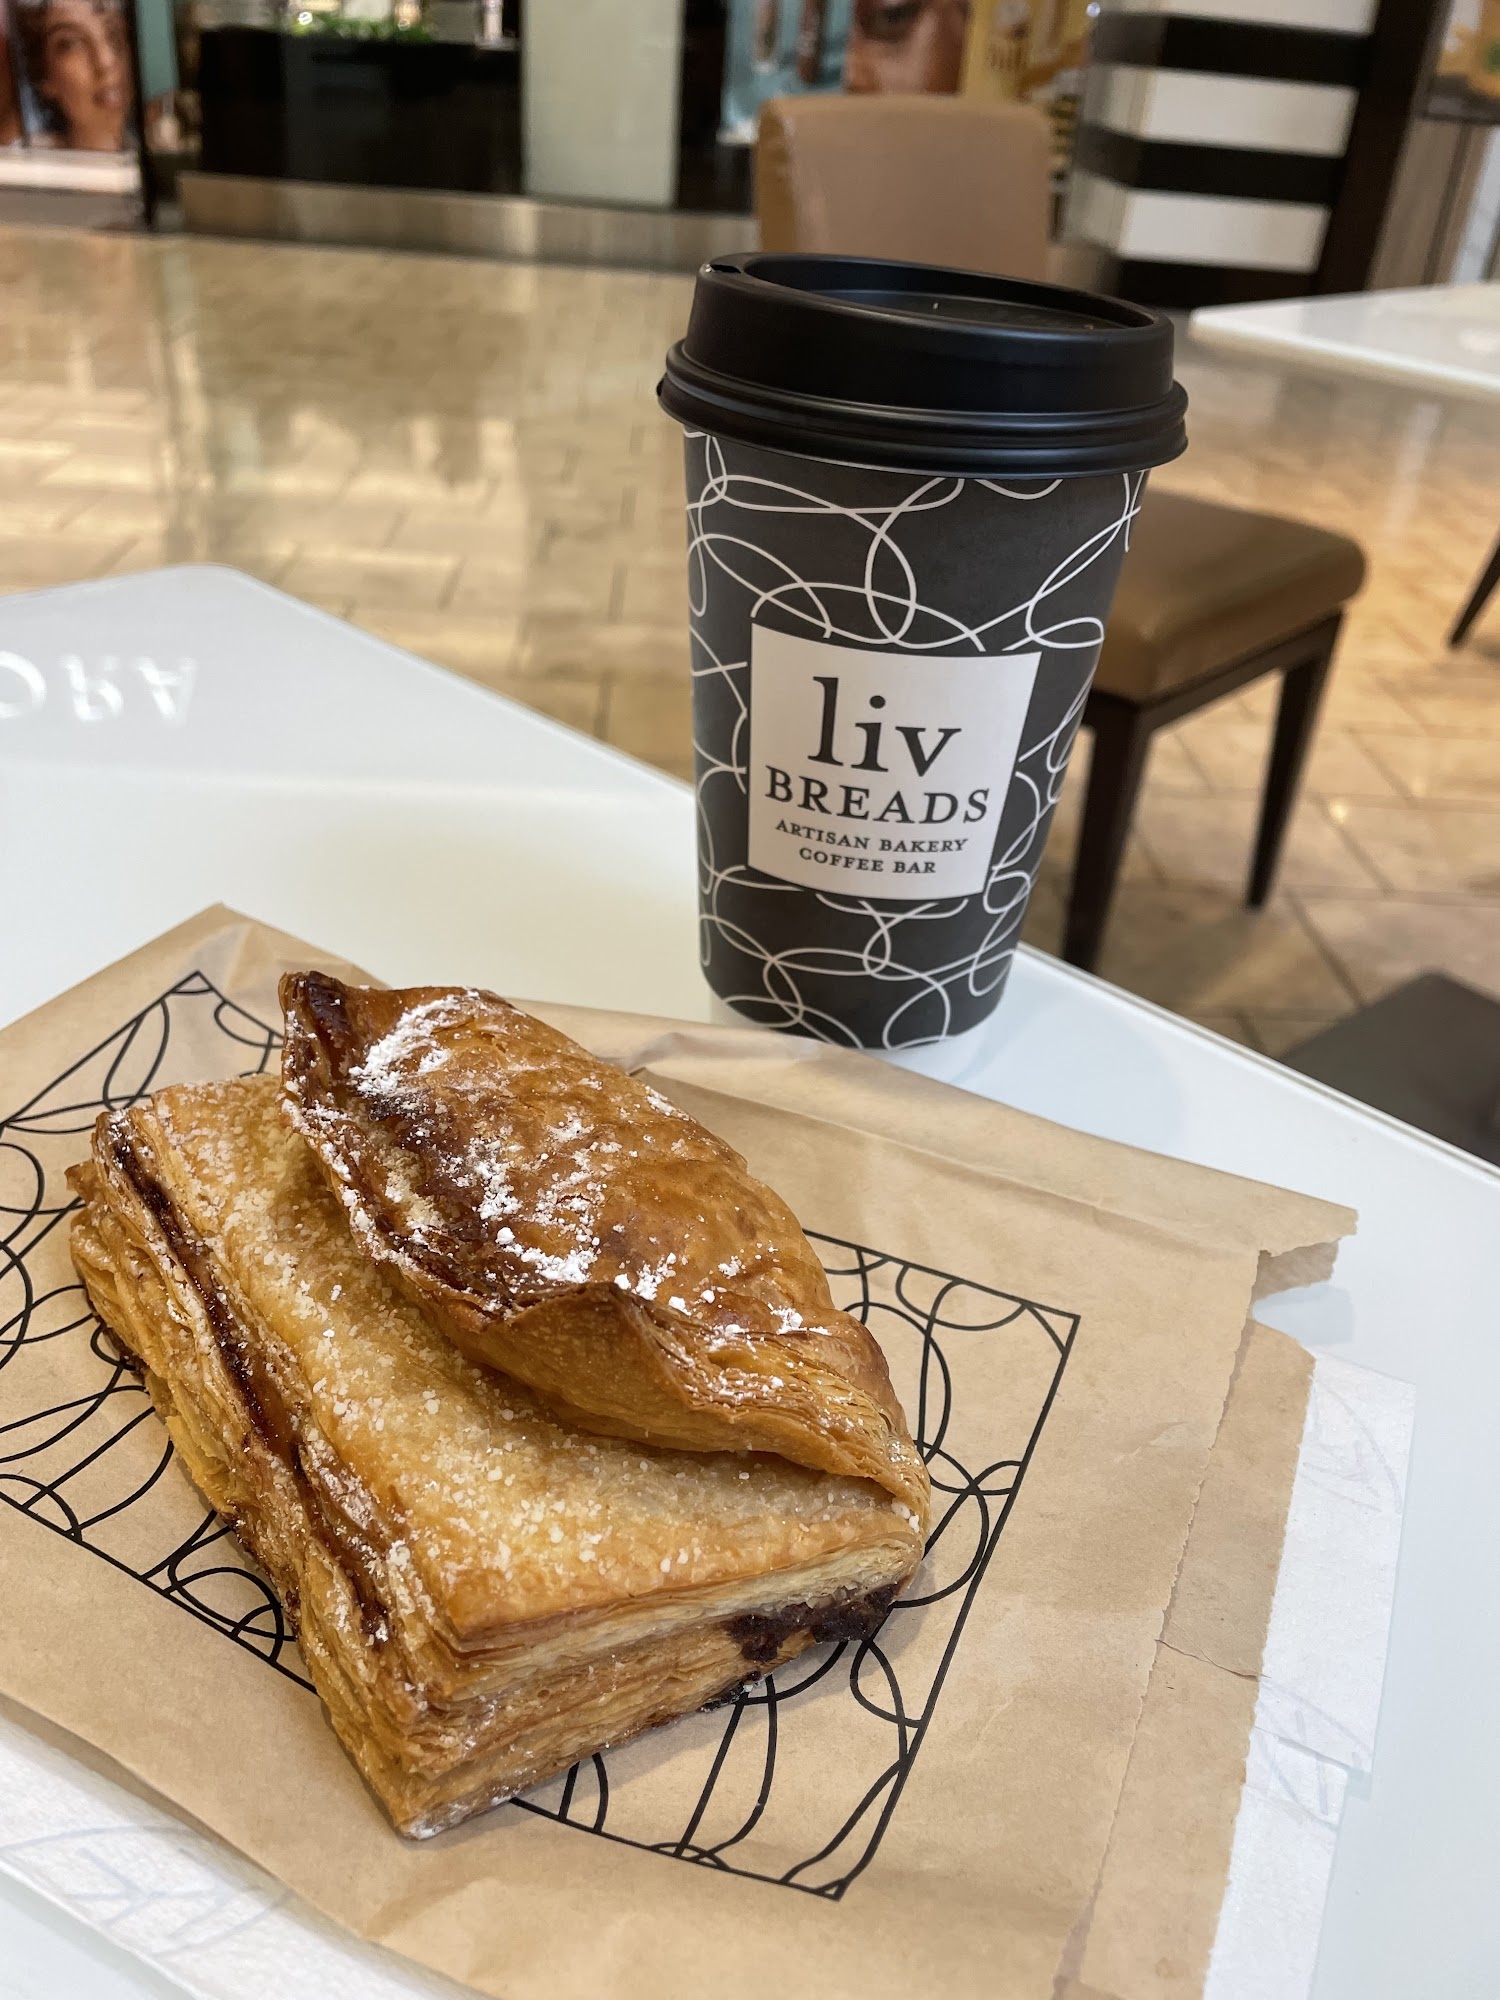 Liv Breads Artisan Bakery and Coffee Bar